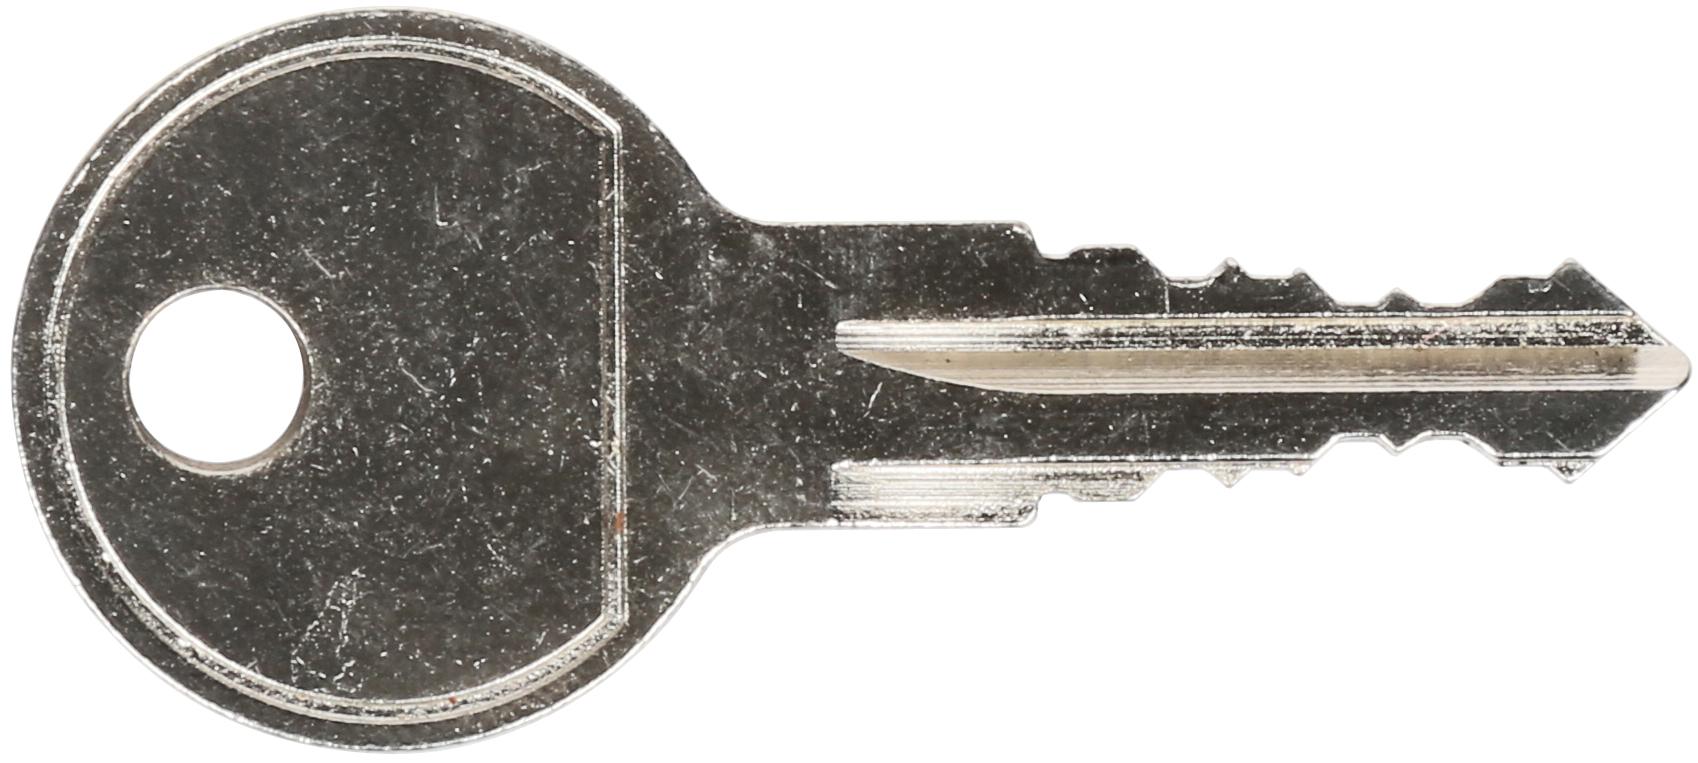 Spare Roof Box Key 050